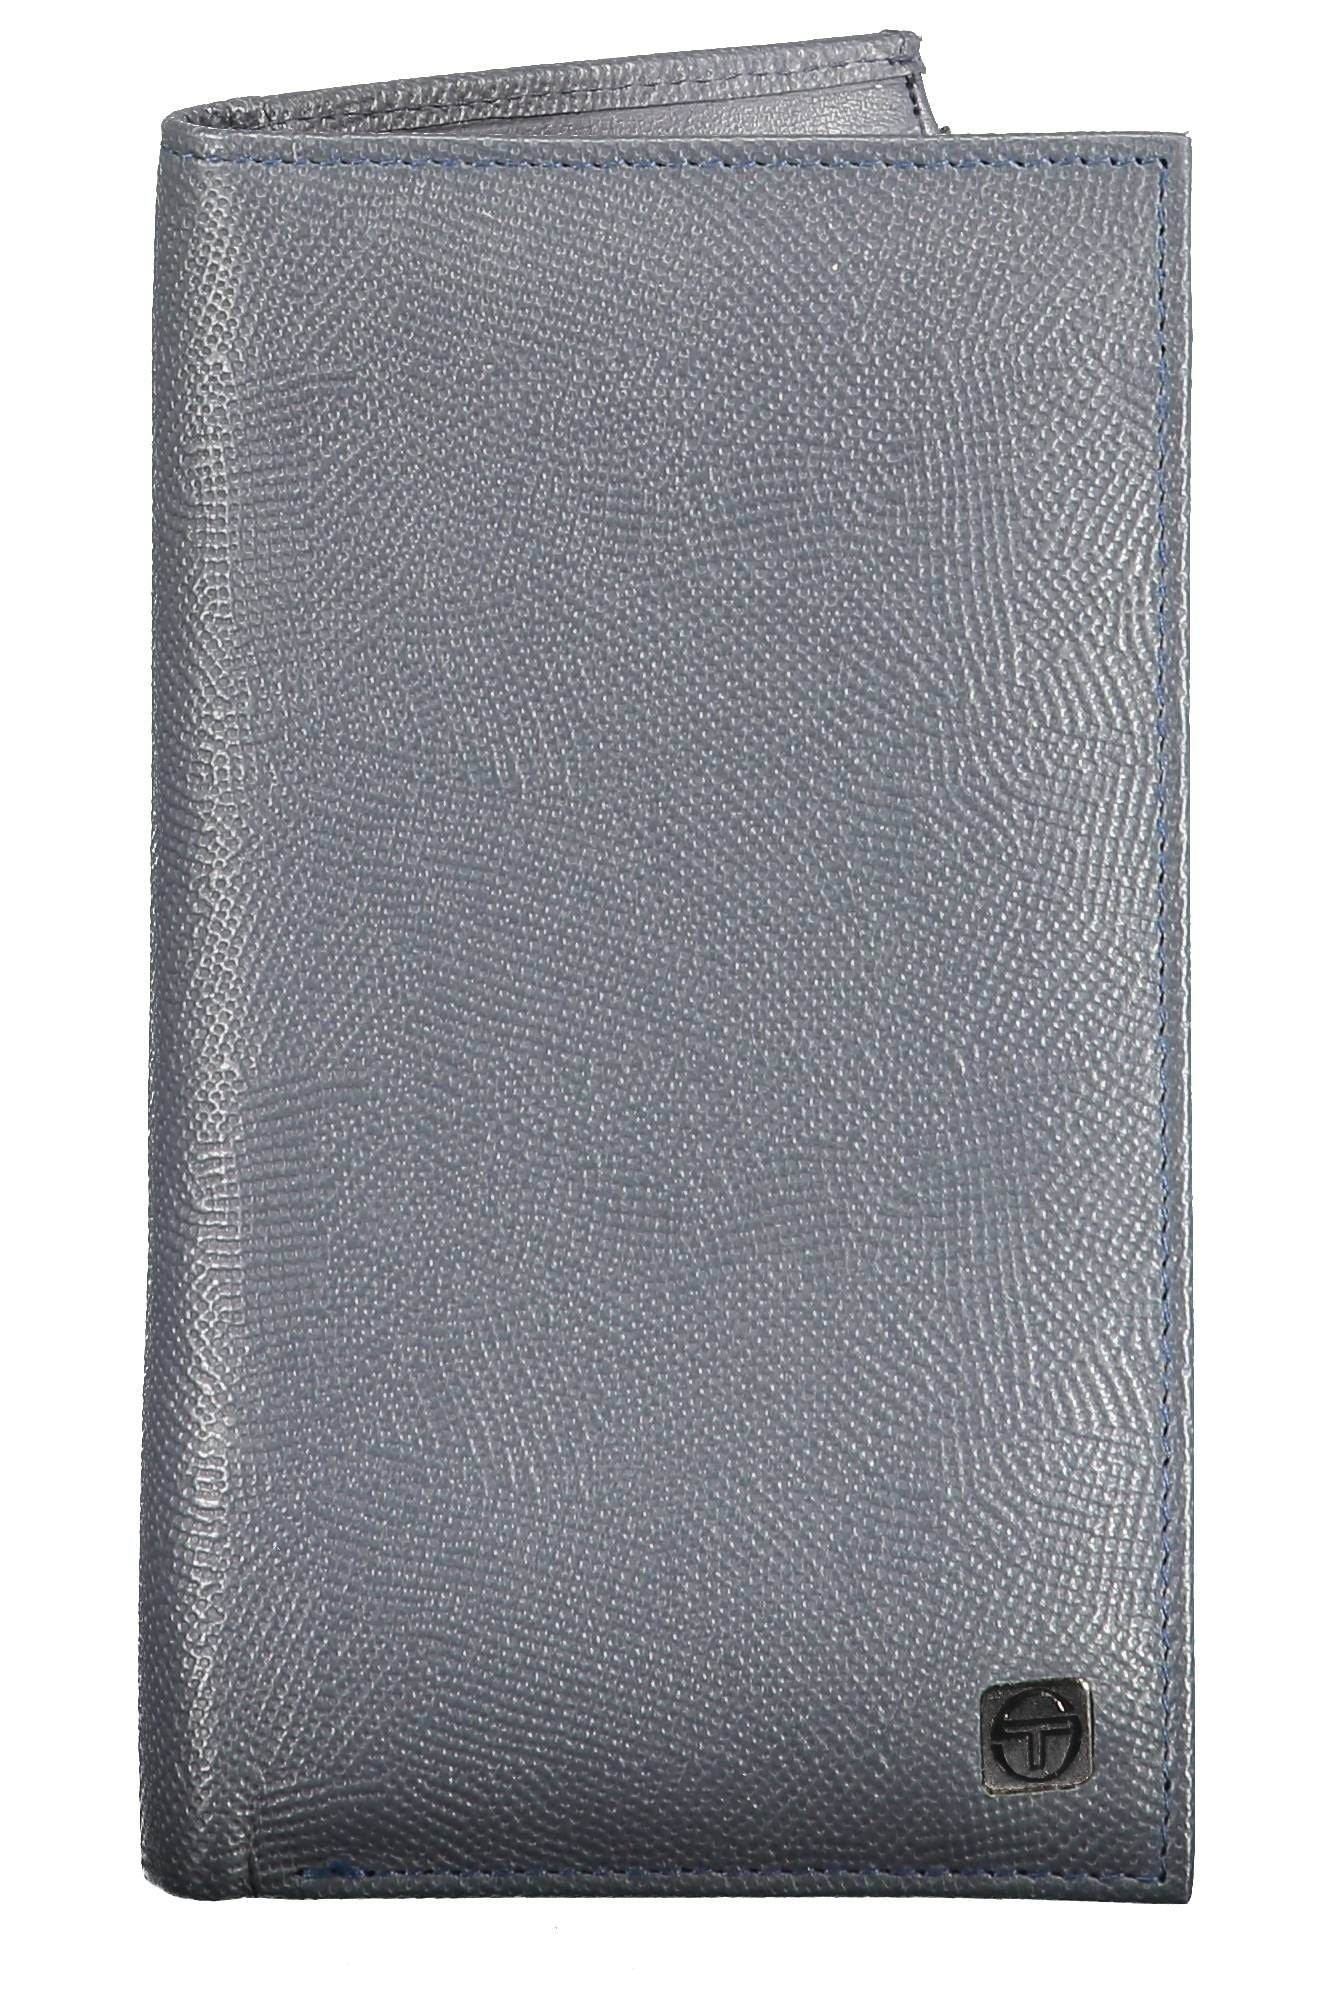 Sleek Double Compartment Leather Wallet